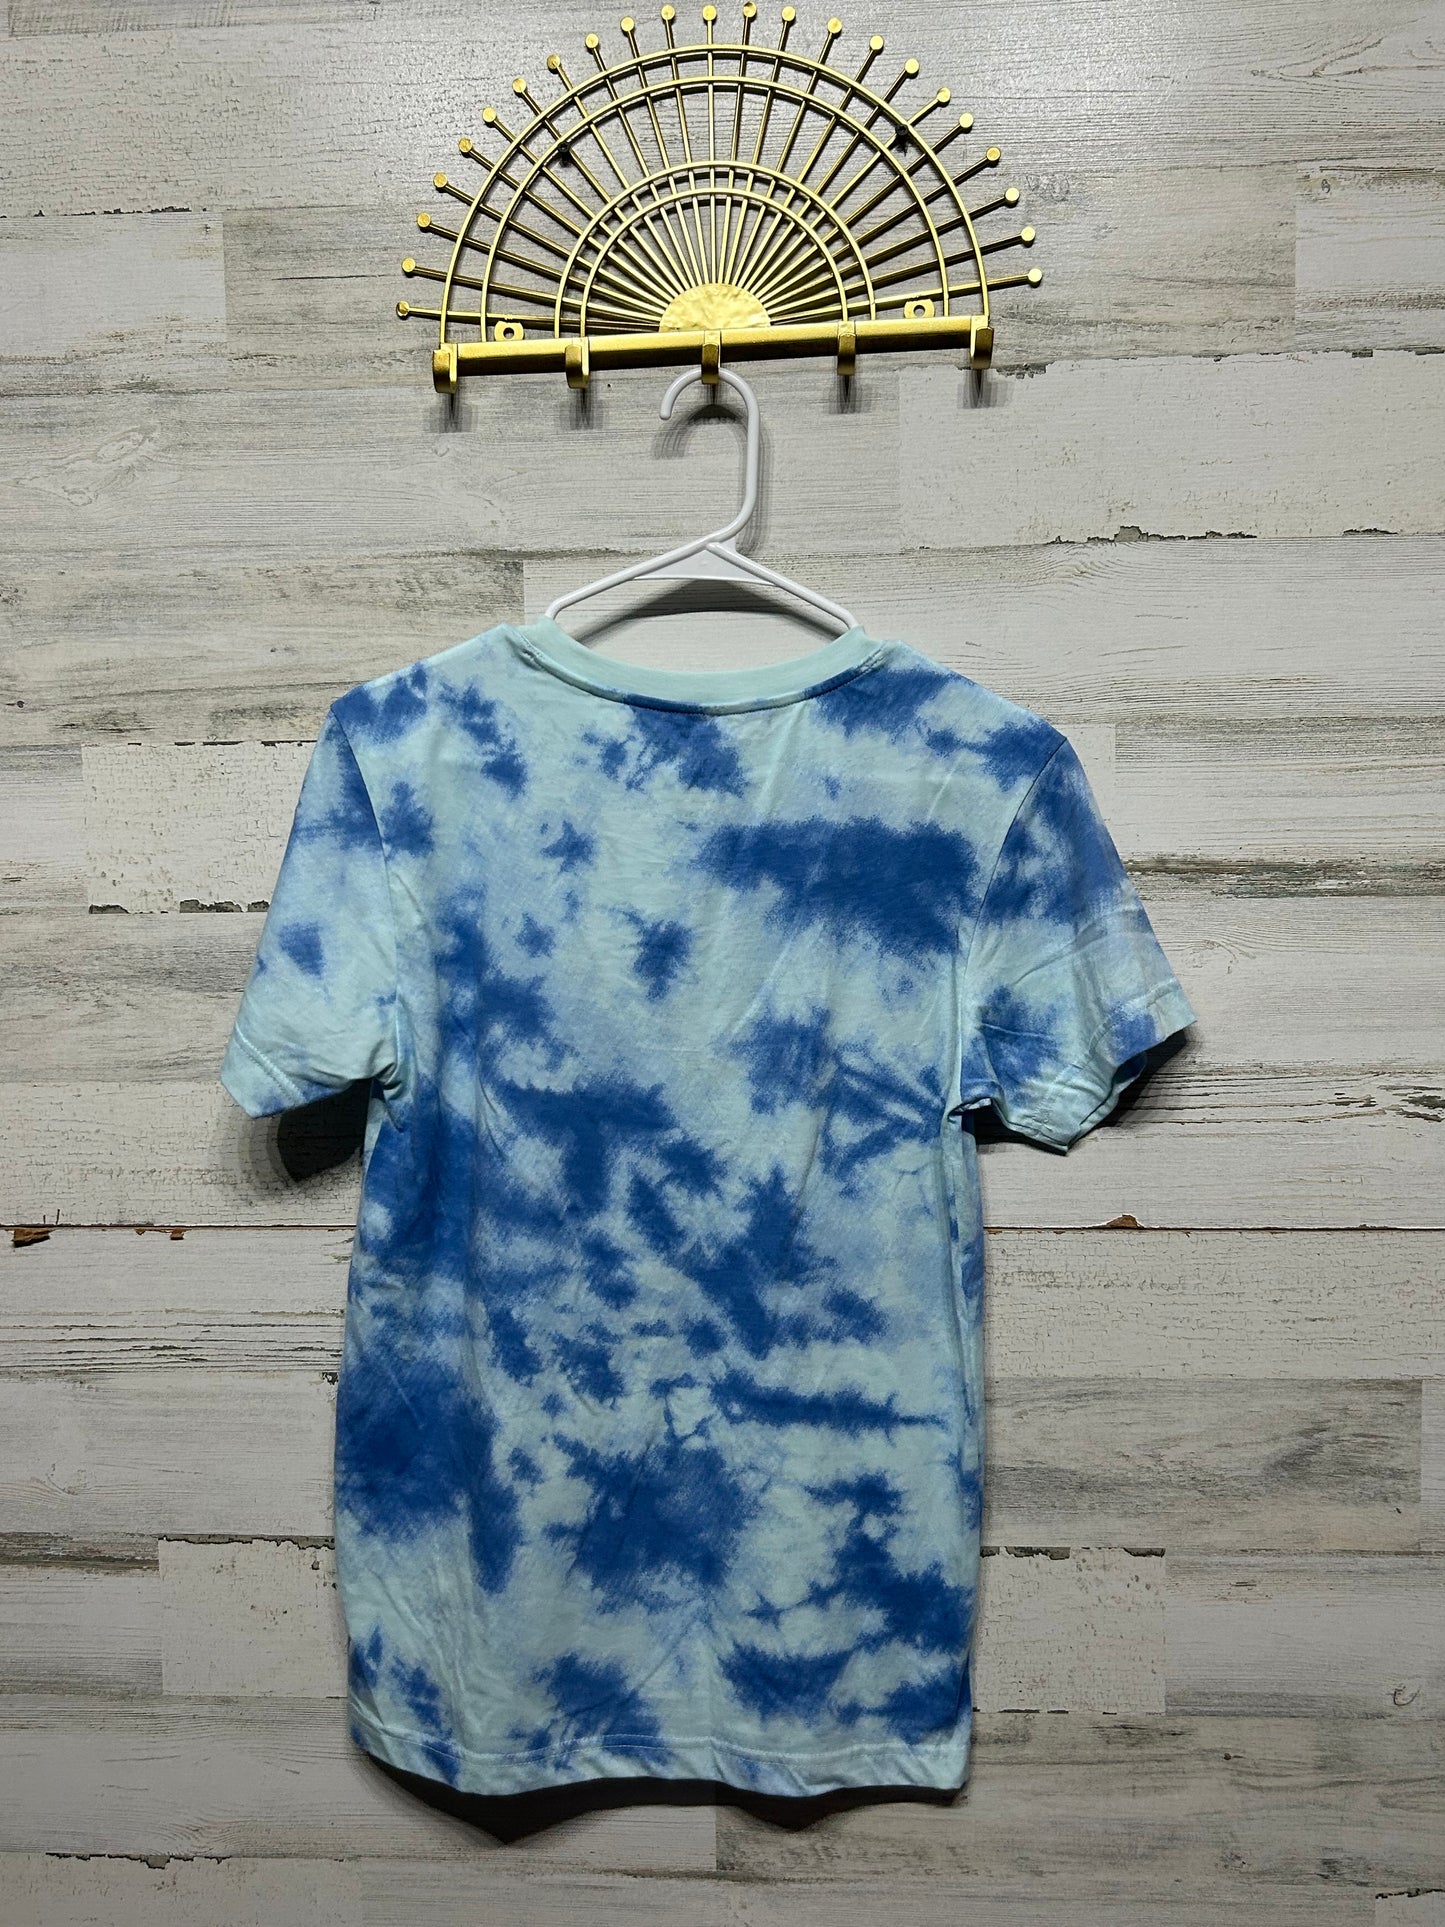 Men's Size XS Original Use Blue Tie Dye Shirt - Good Used Condition